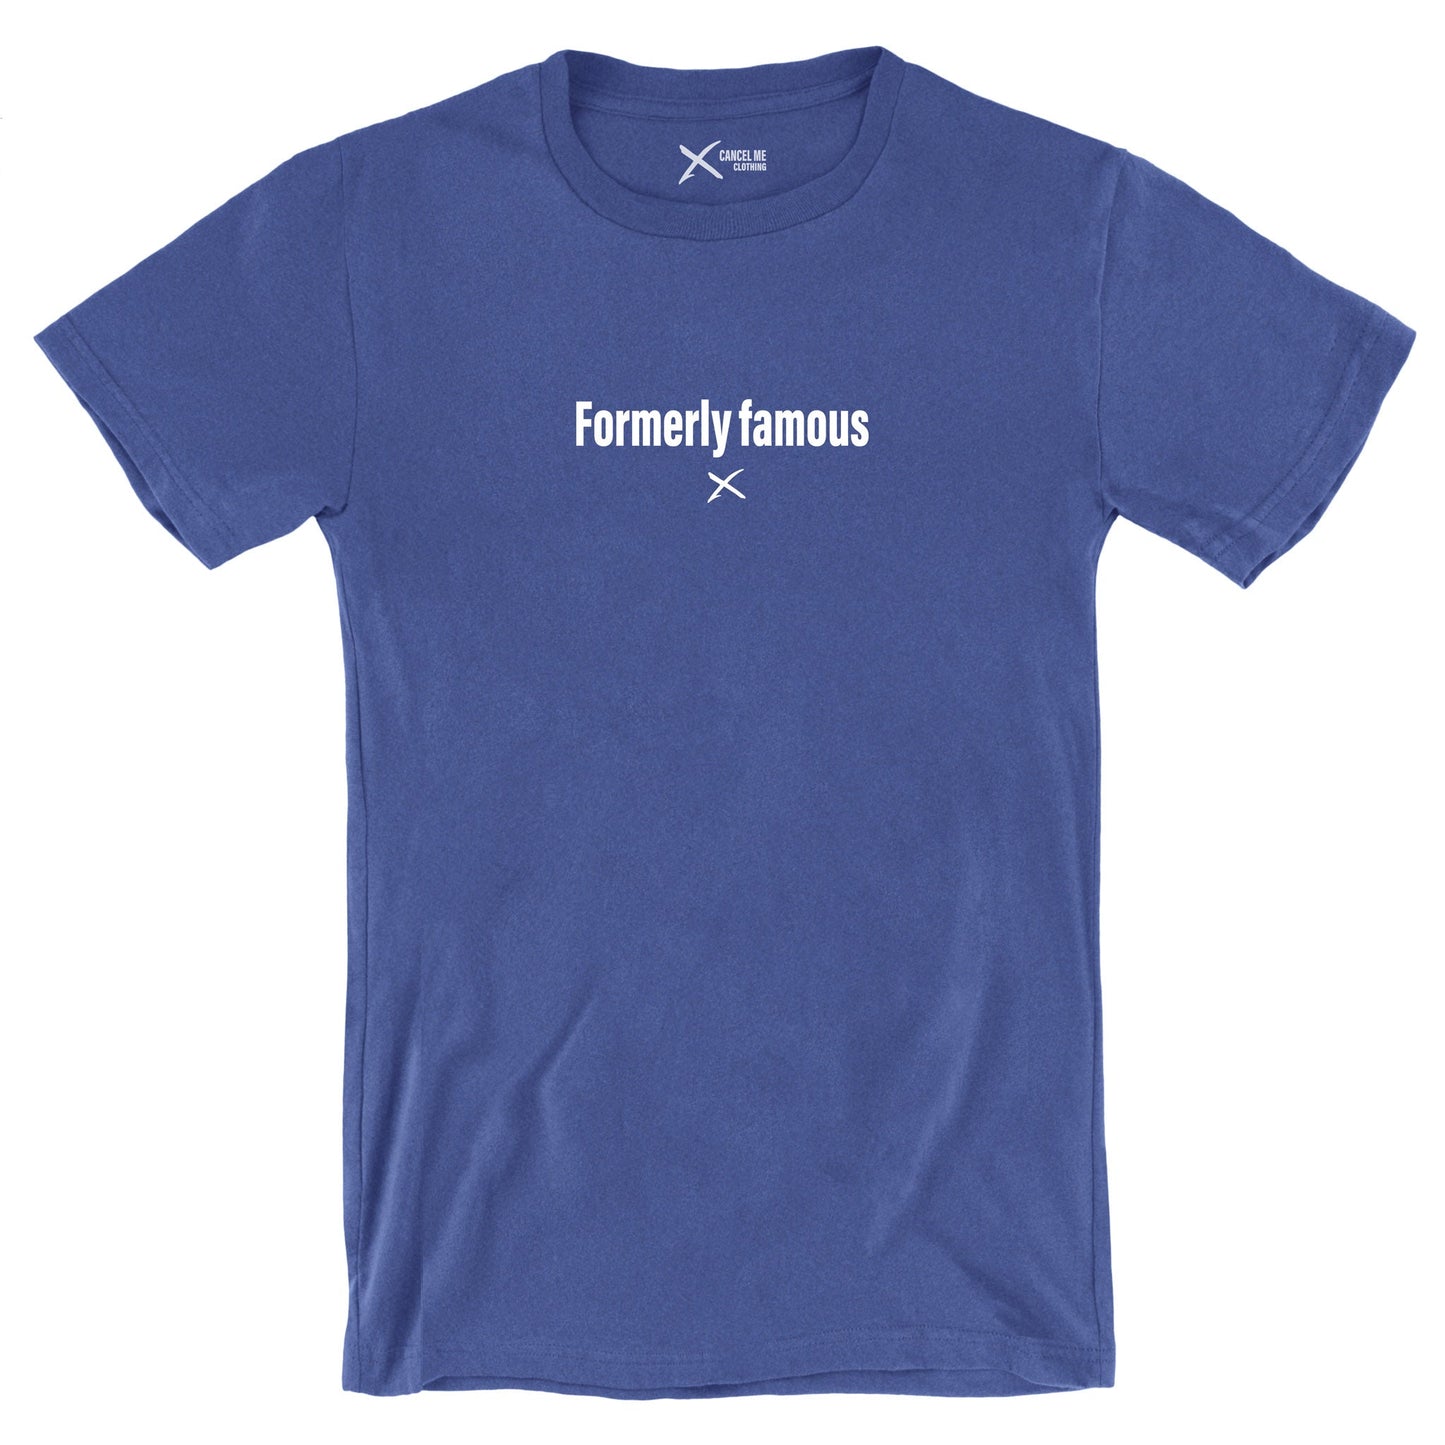 Formerly famous - Shirt